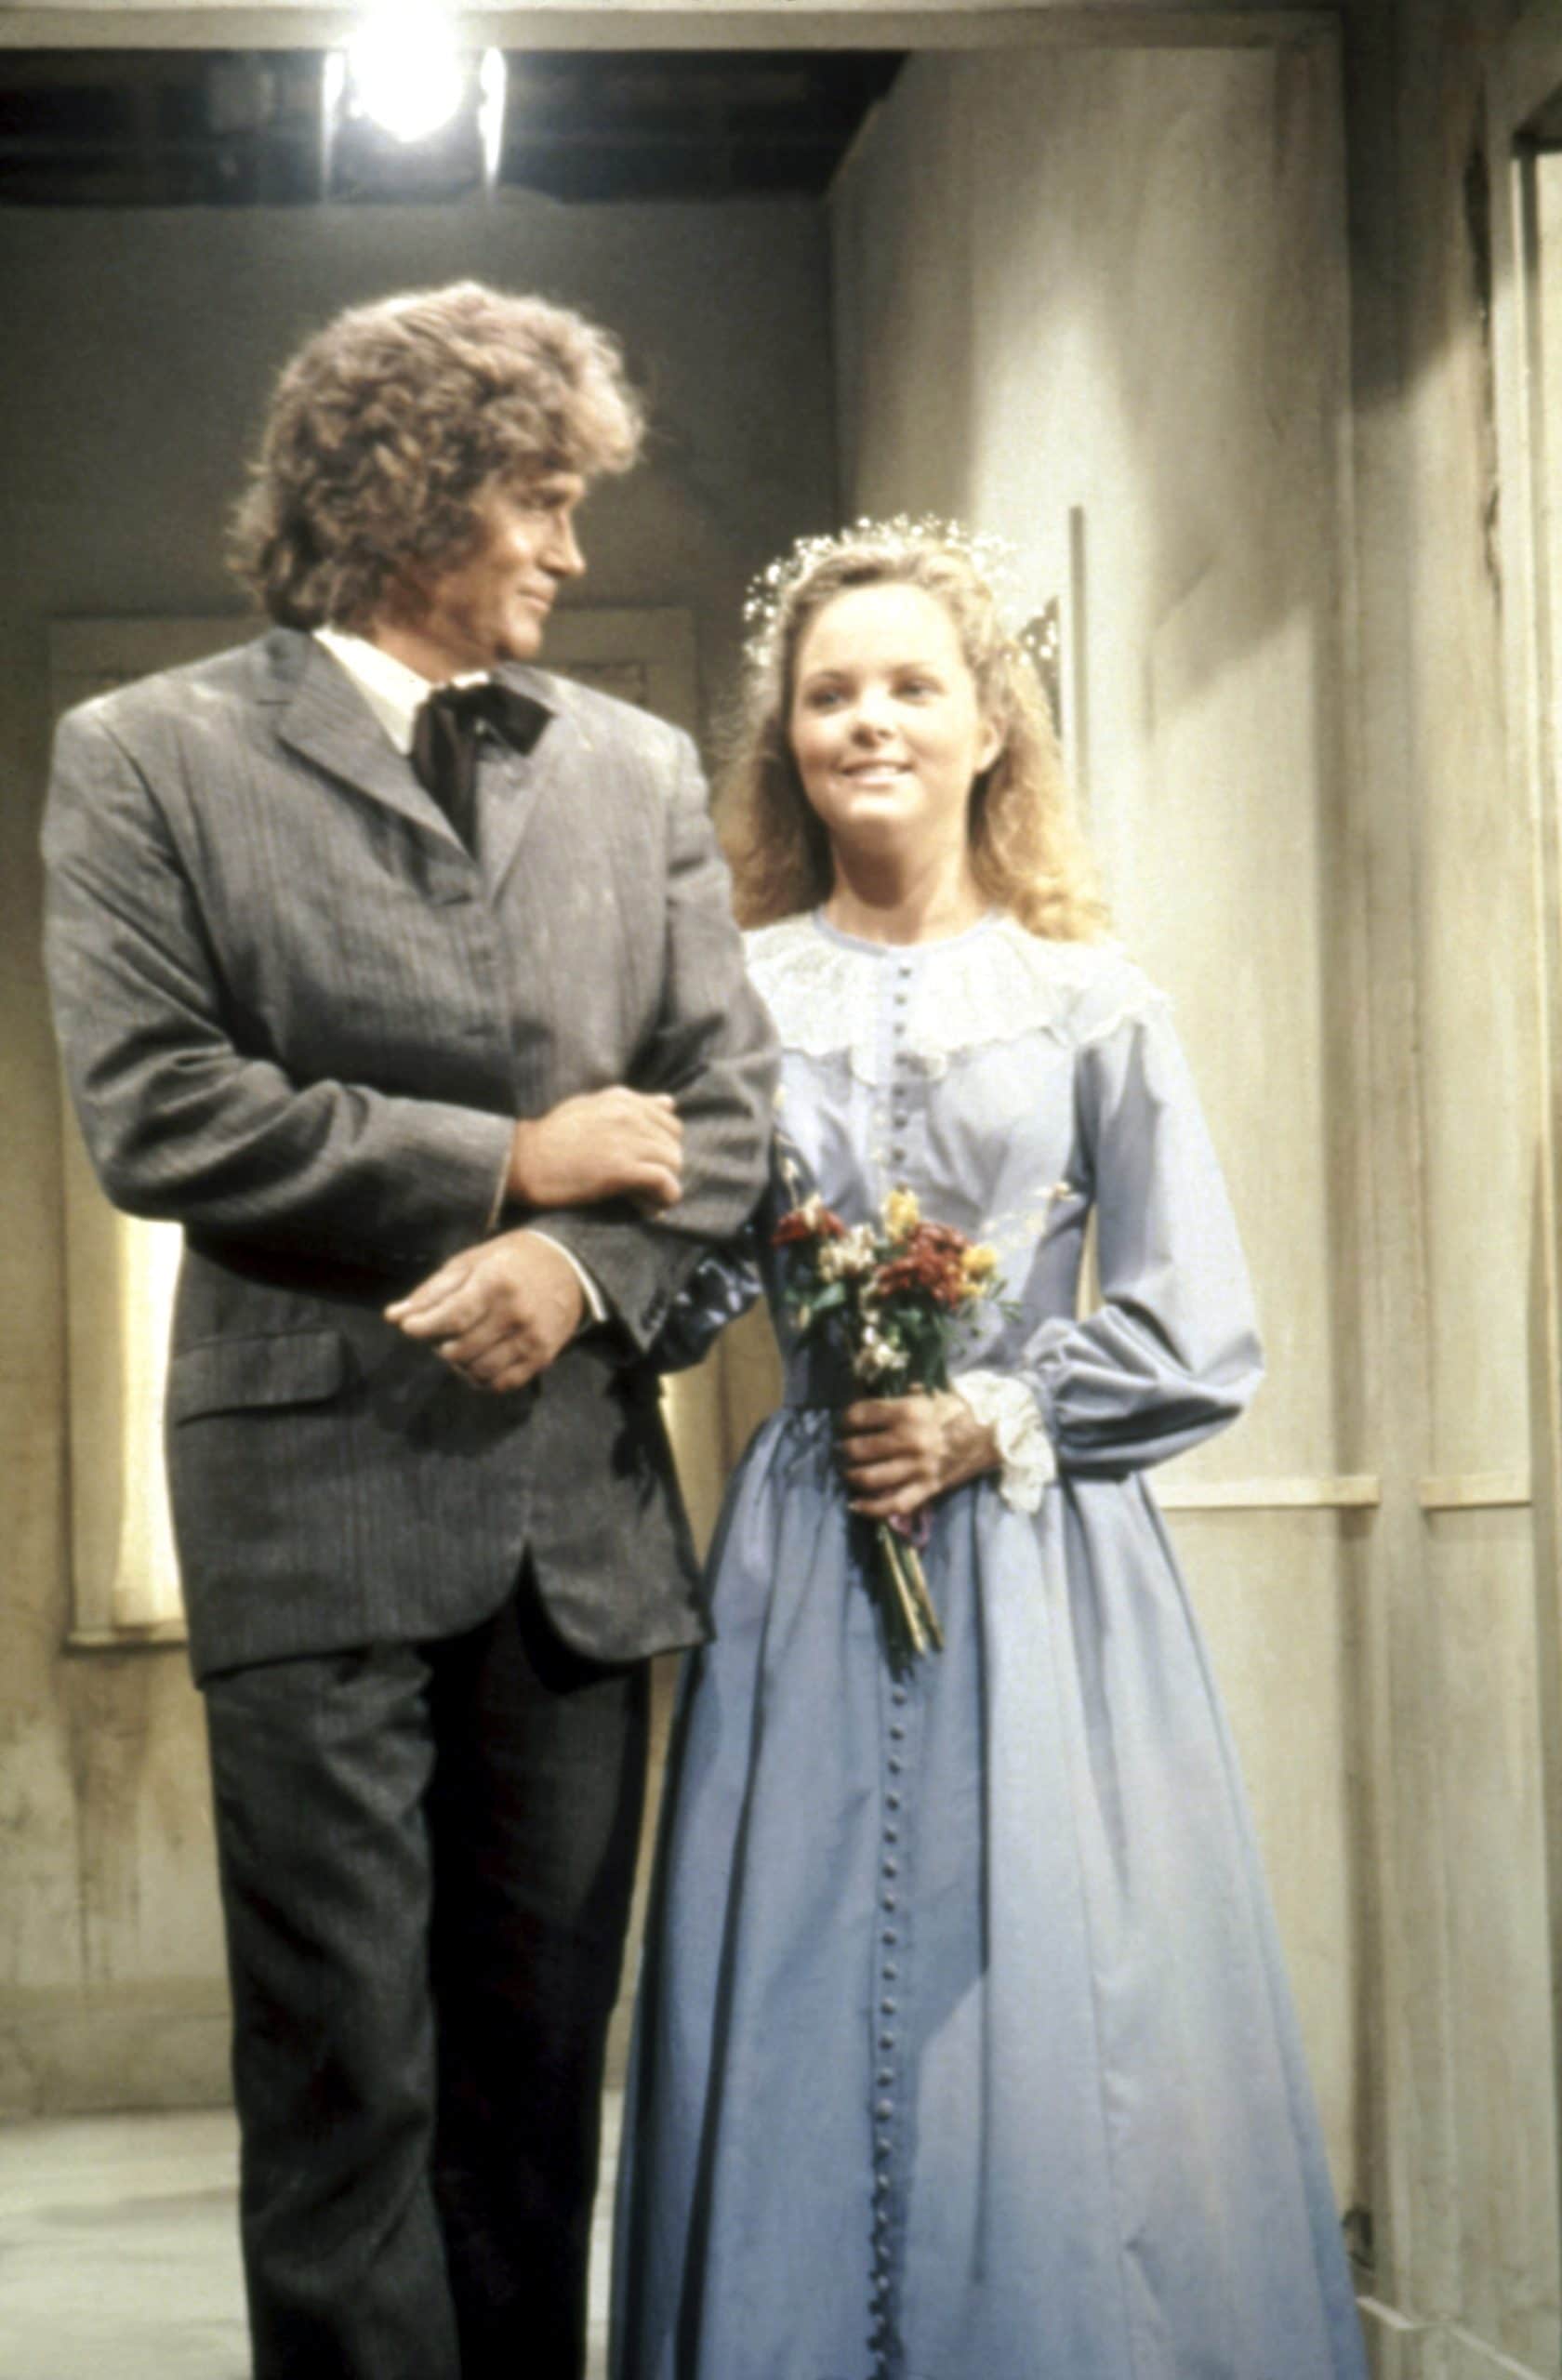 LITTLE HOUSE ON THE PRAIRIE, from left: Michael Landon, Melissa Sue Anderson, 1974-83